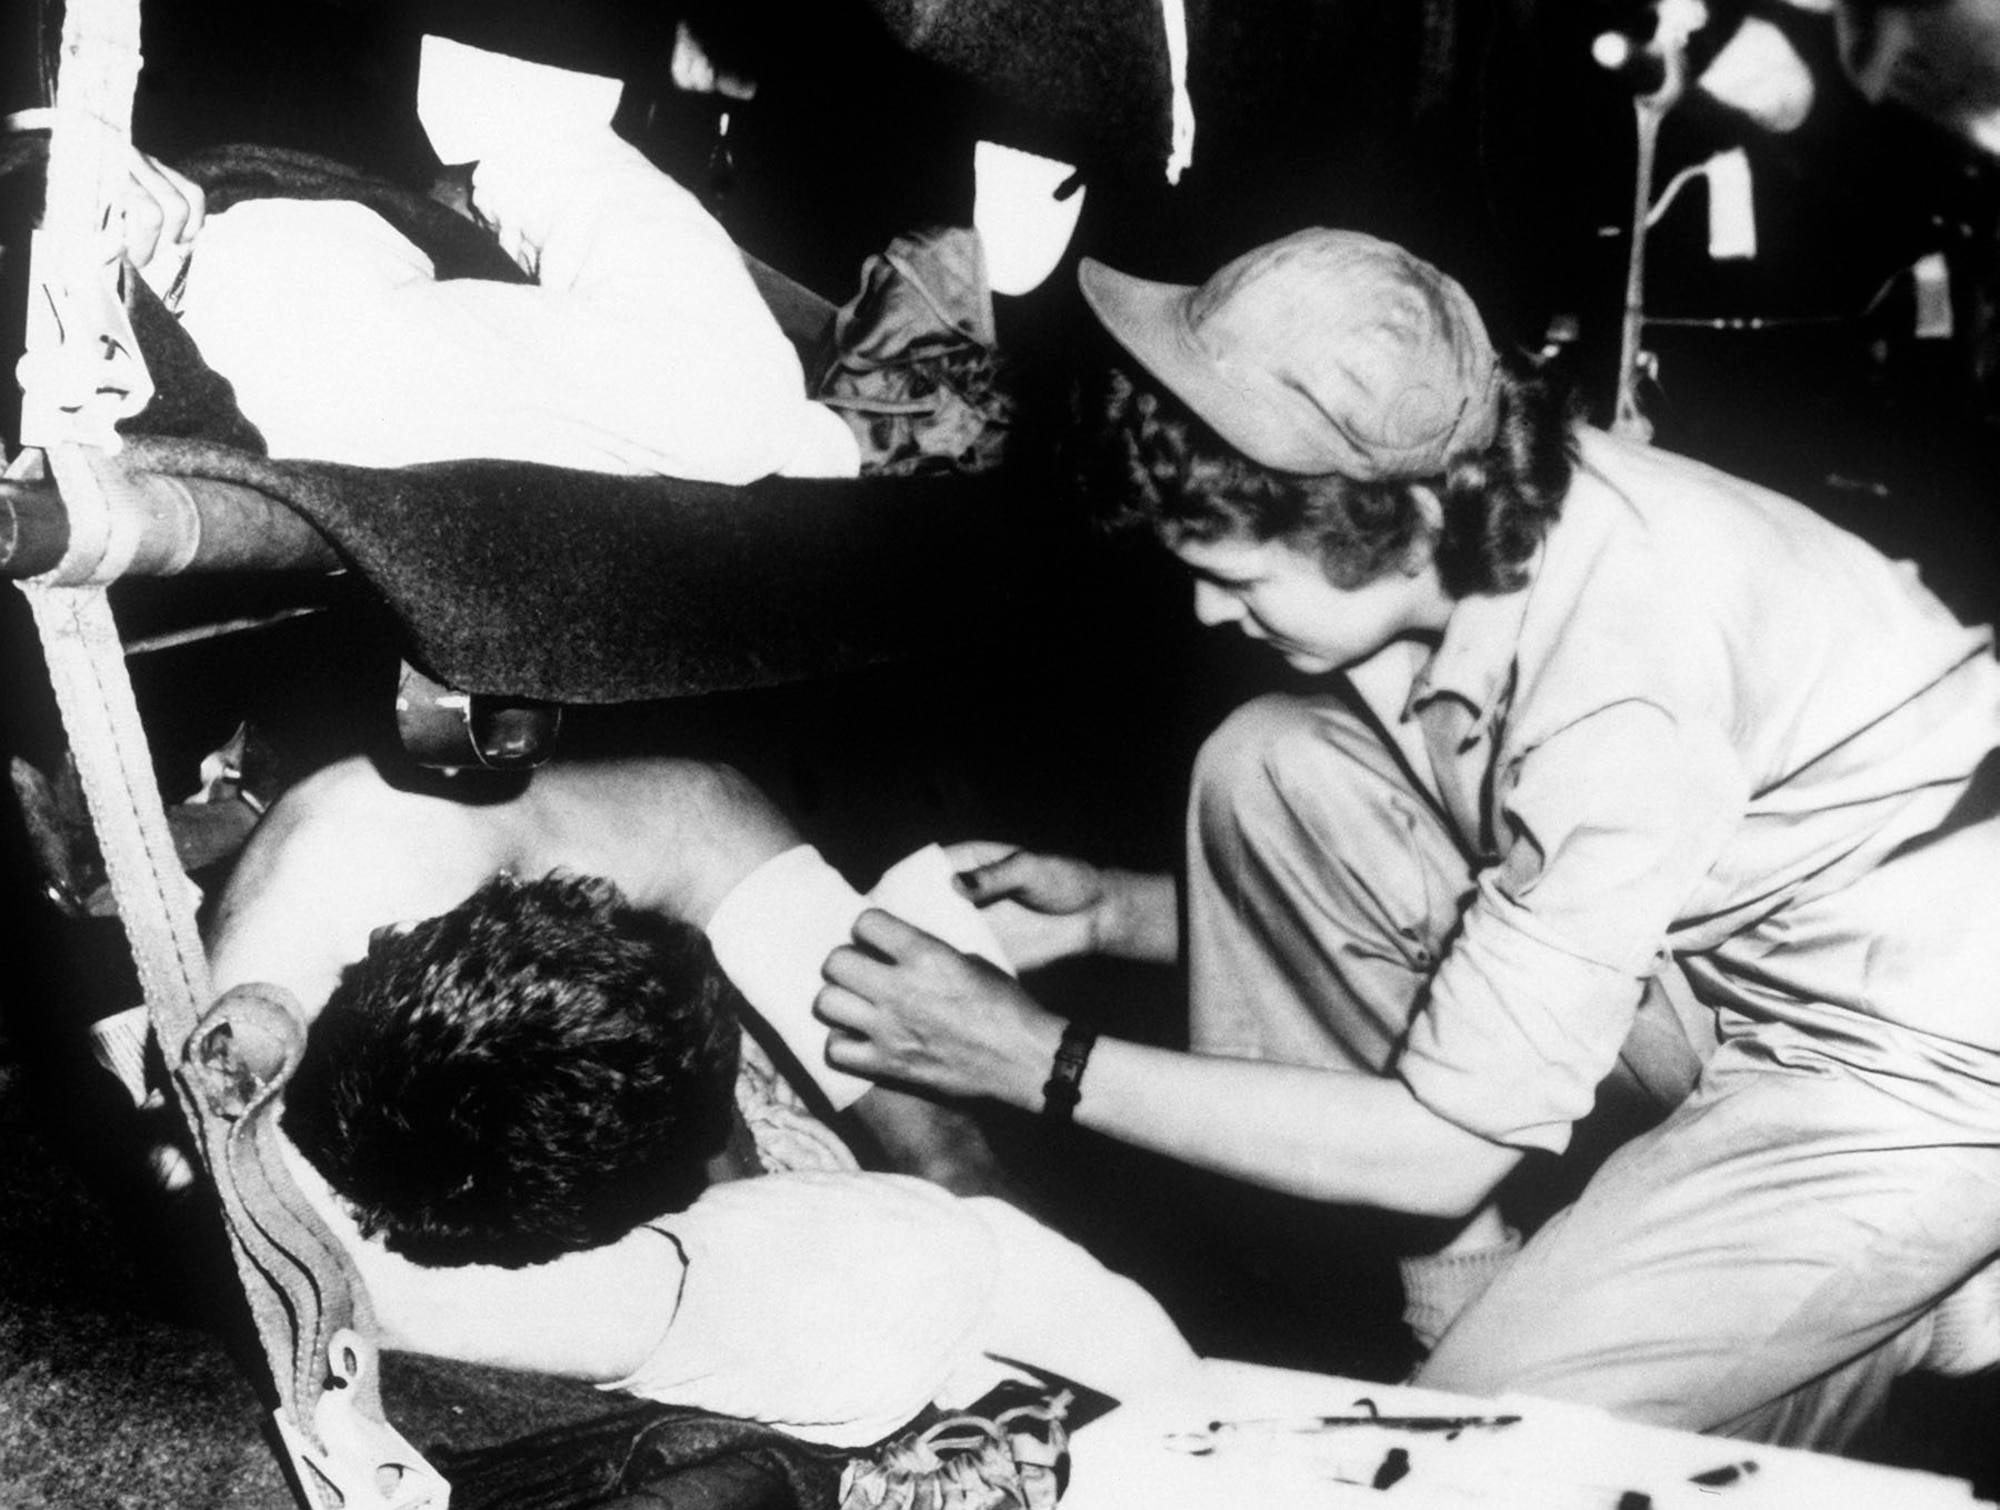 Flight nurse 2nd Lt. Pauline Kircher dresses a patient’s wound during the flight from Korea to Japan, May 1951. (U.S. Air Force photo)